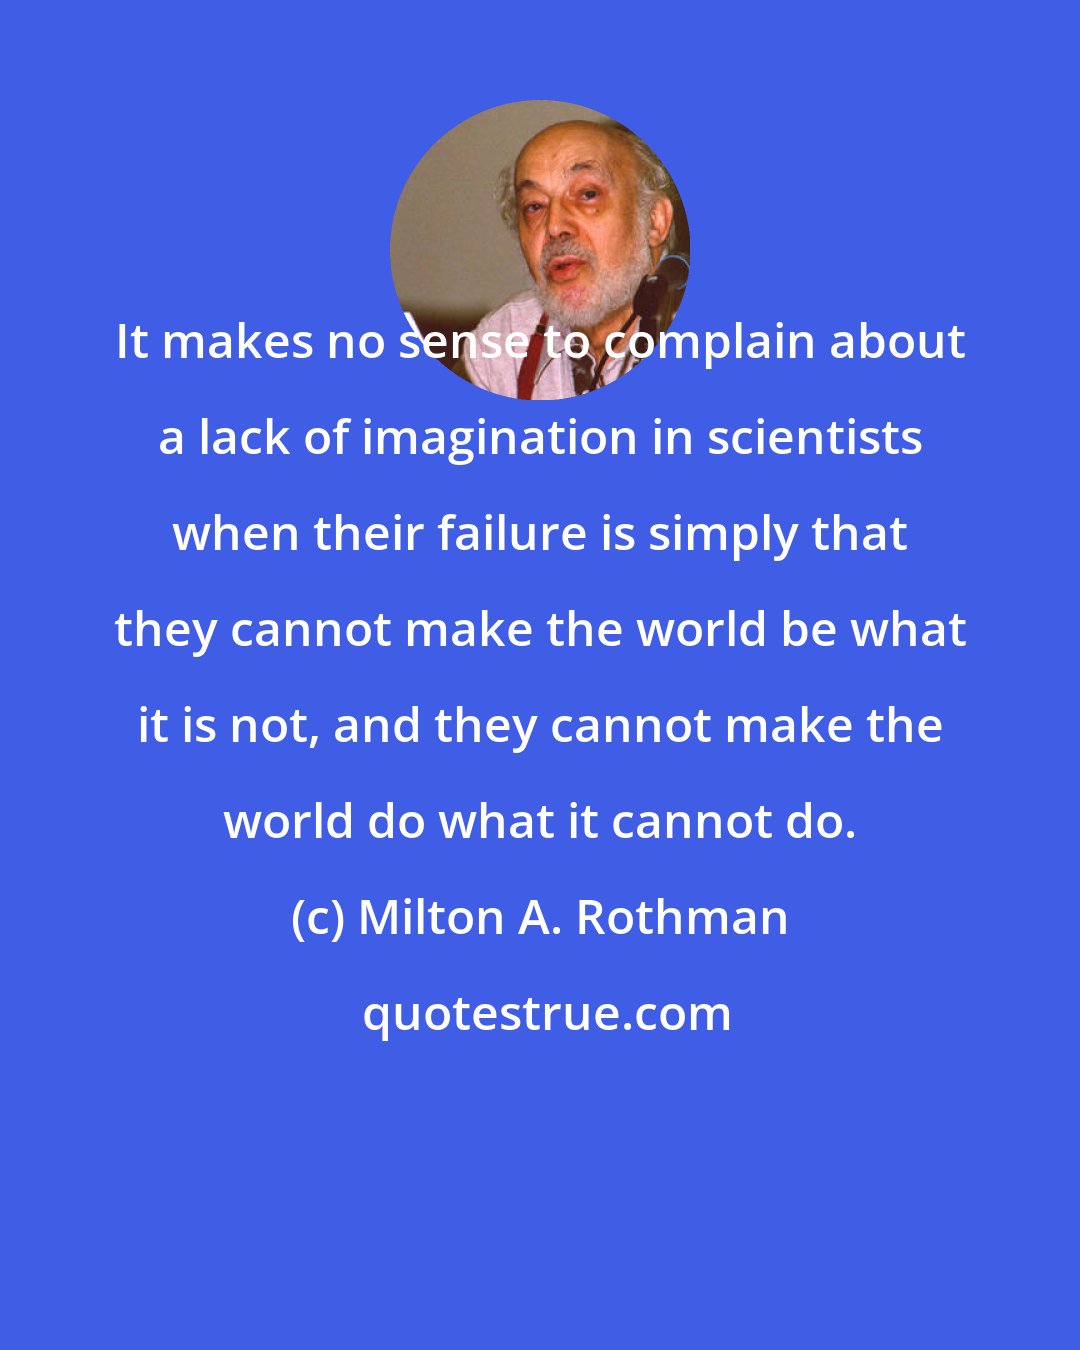 Milton A. Rothman: It makes no sense to complain about a lack of imagination in scientists when their failure is simply that they cannot make the world be what it is not, and they cannot make the world do what it cannot do.